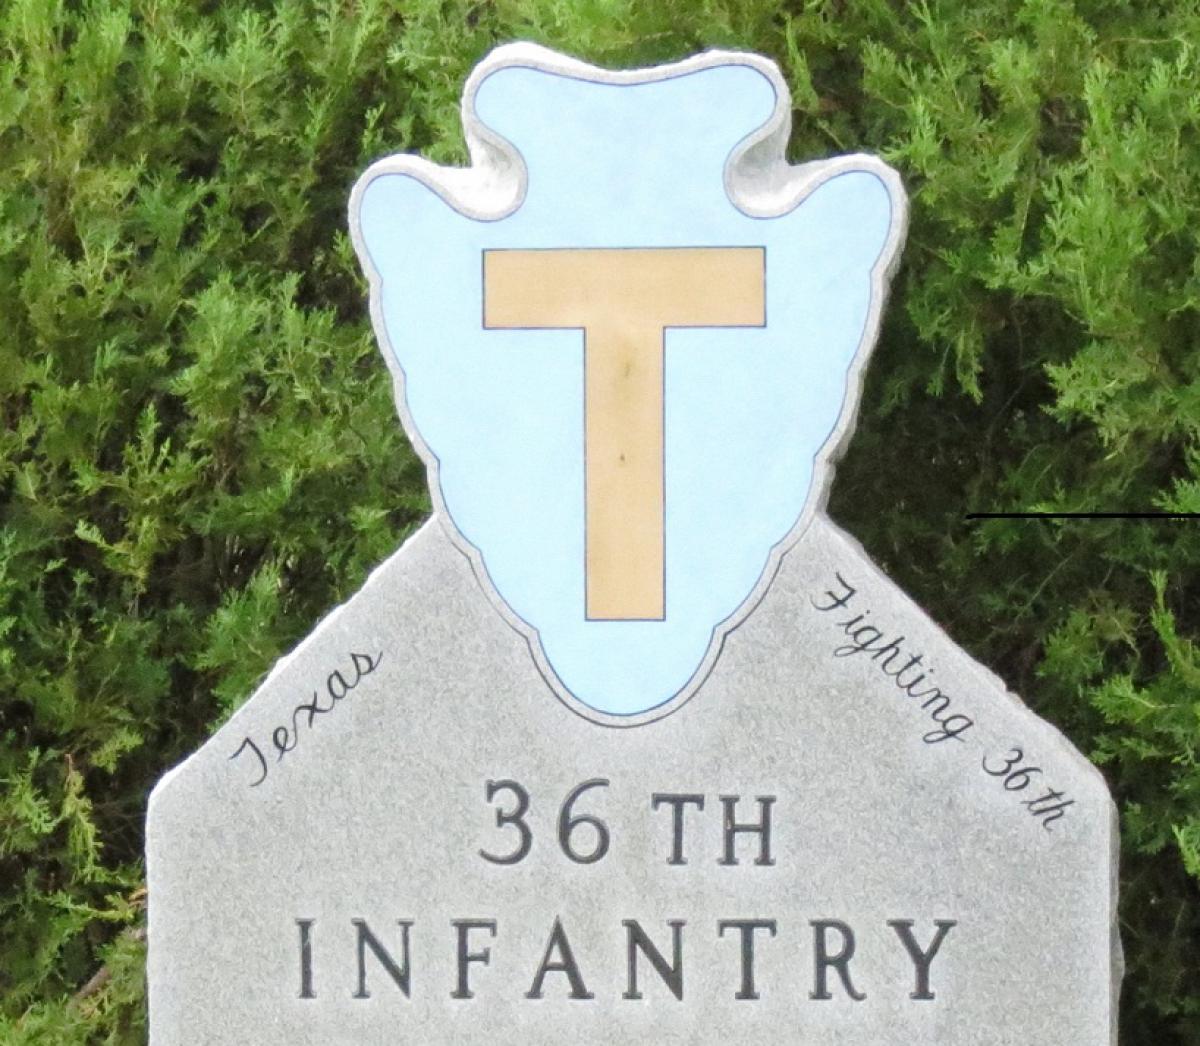 OK, Grove, Headstone Symbols and Meanings, U. S. Army 36th Infantry Division (Lone Star)